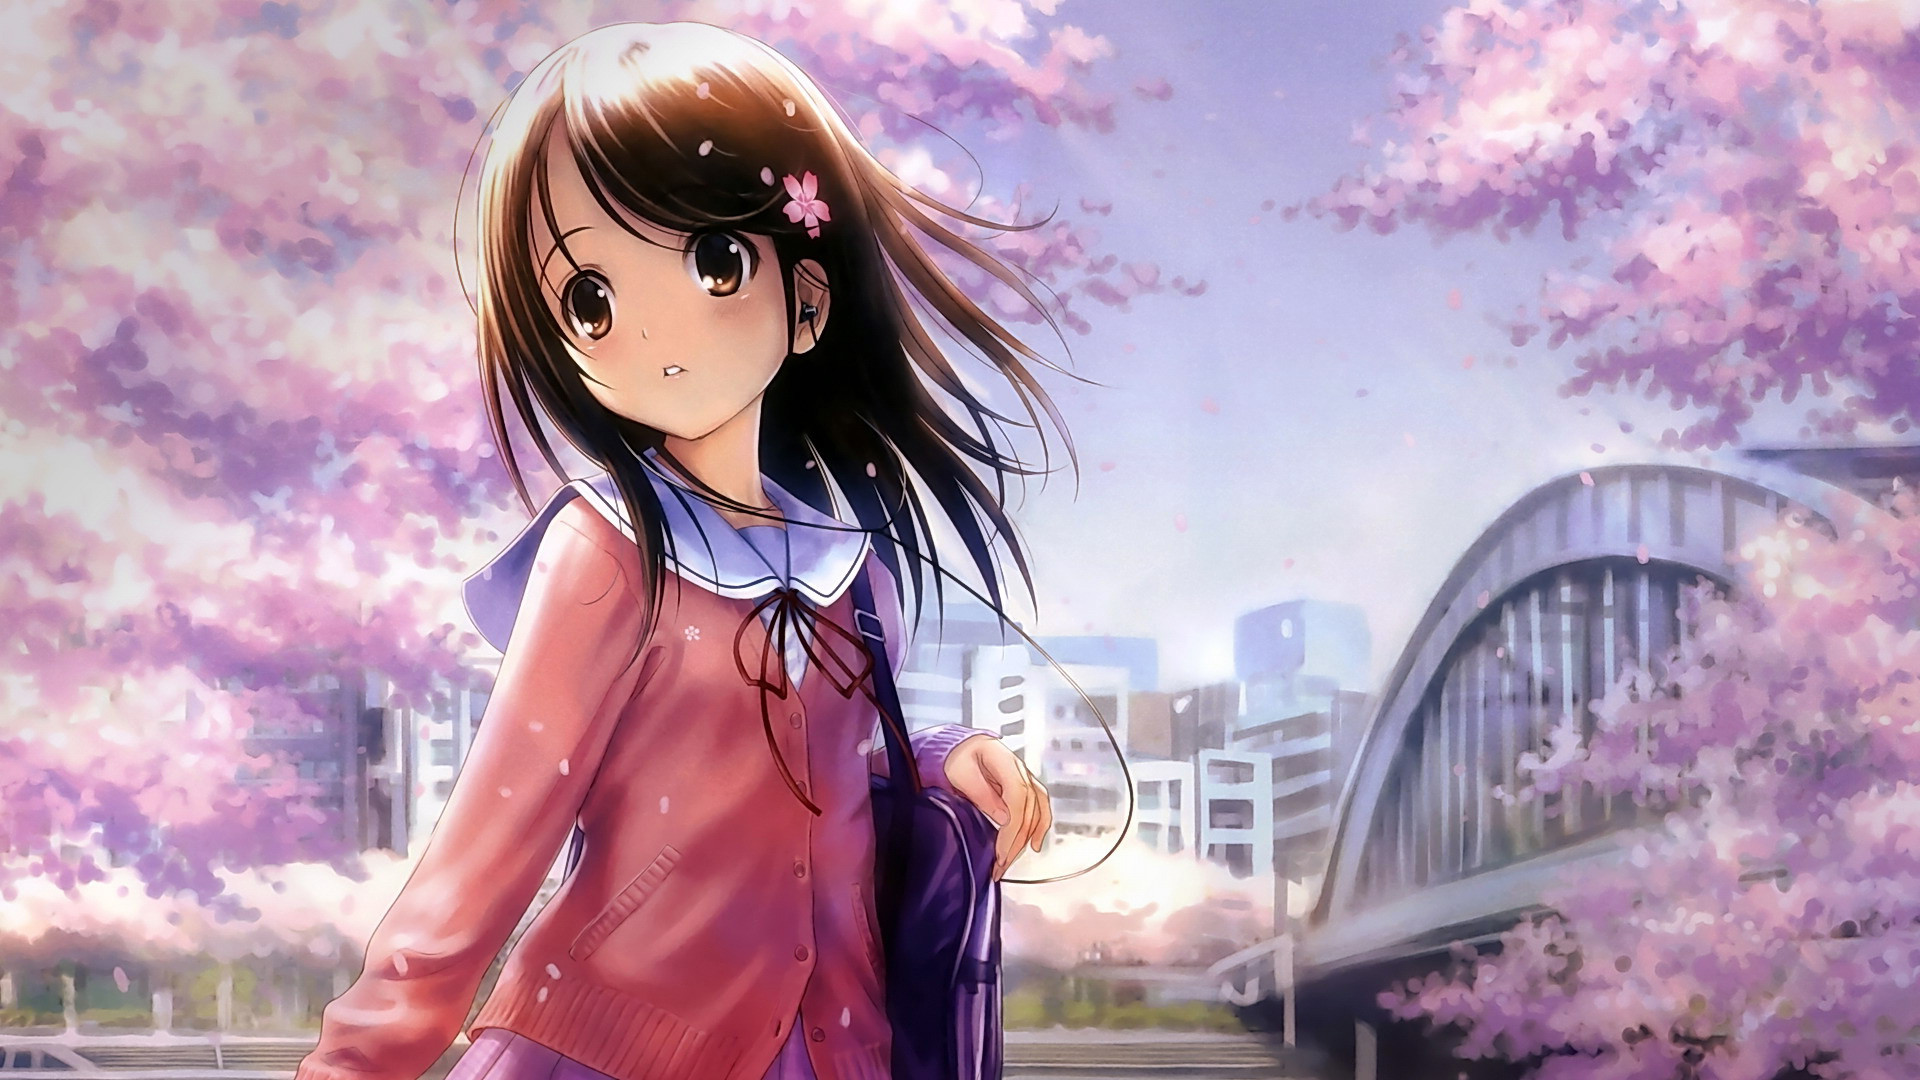 Free Anime Backgrounds Anime Wallpaper  照片图像